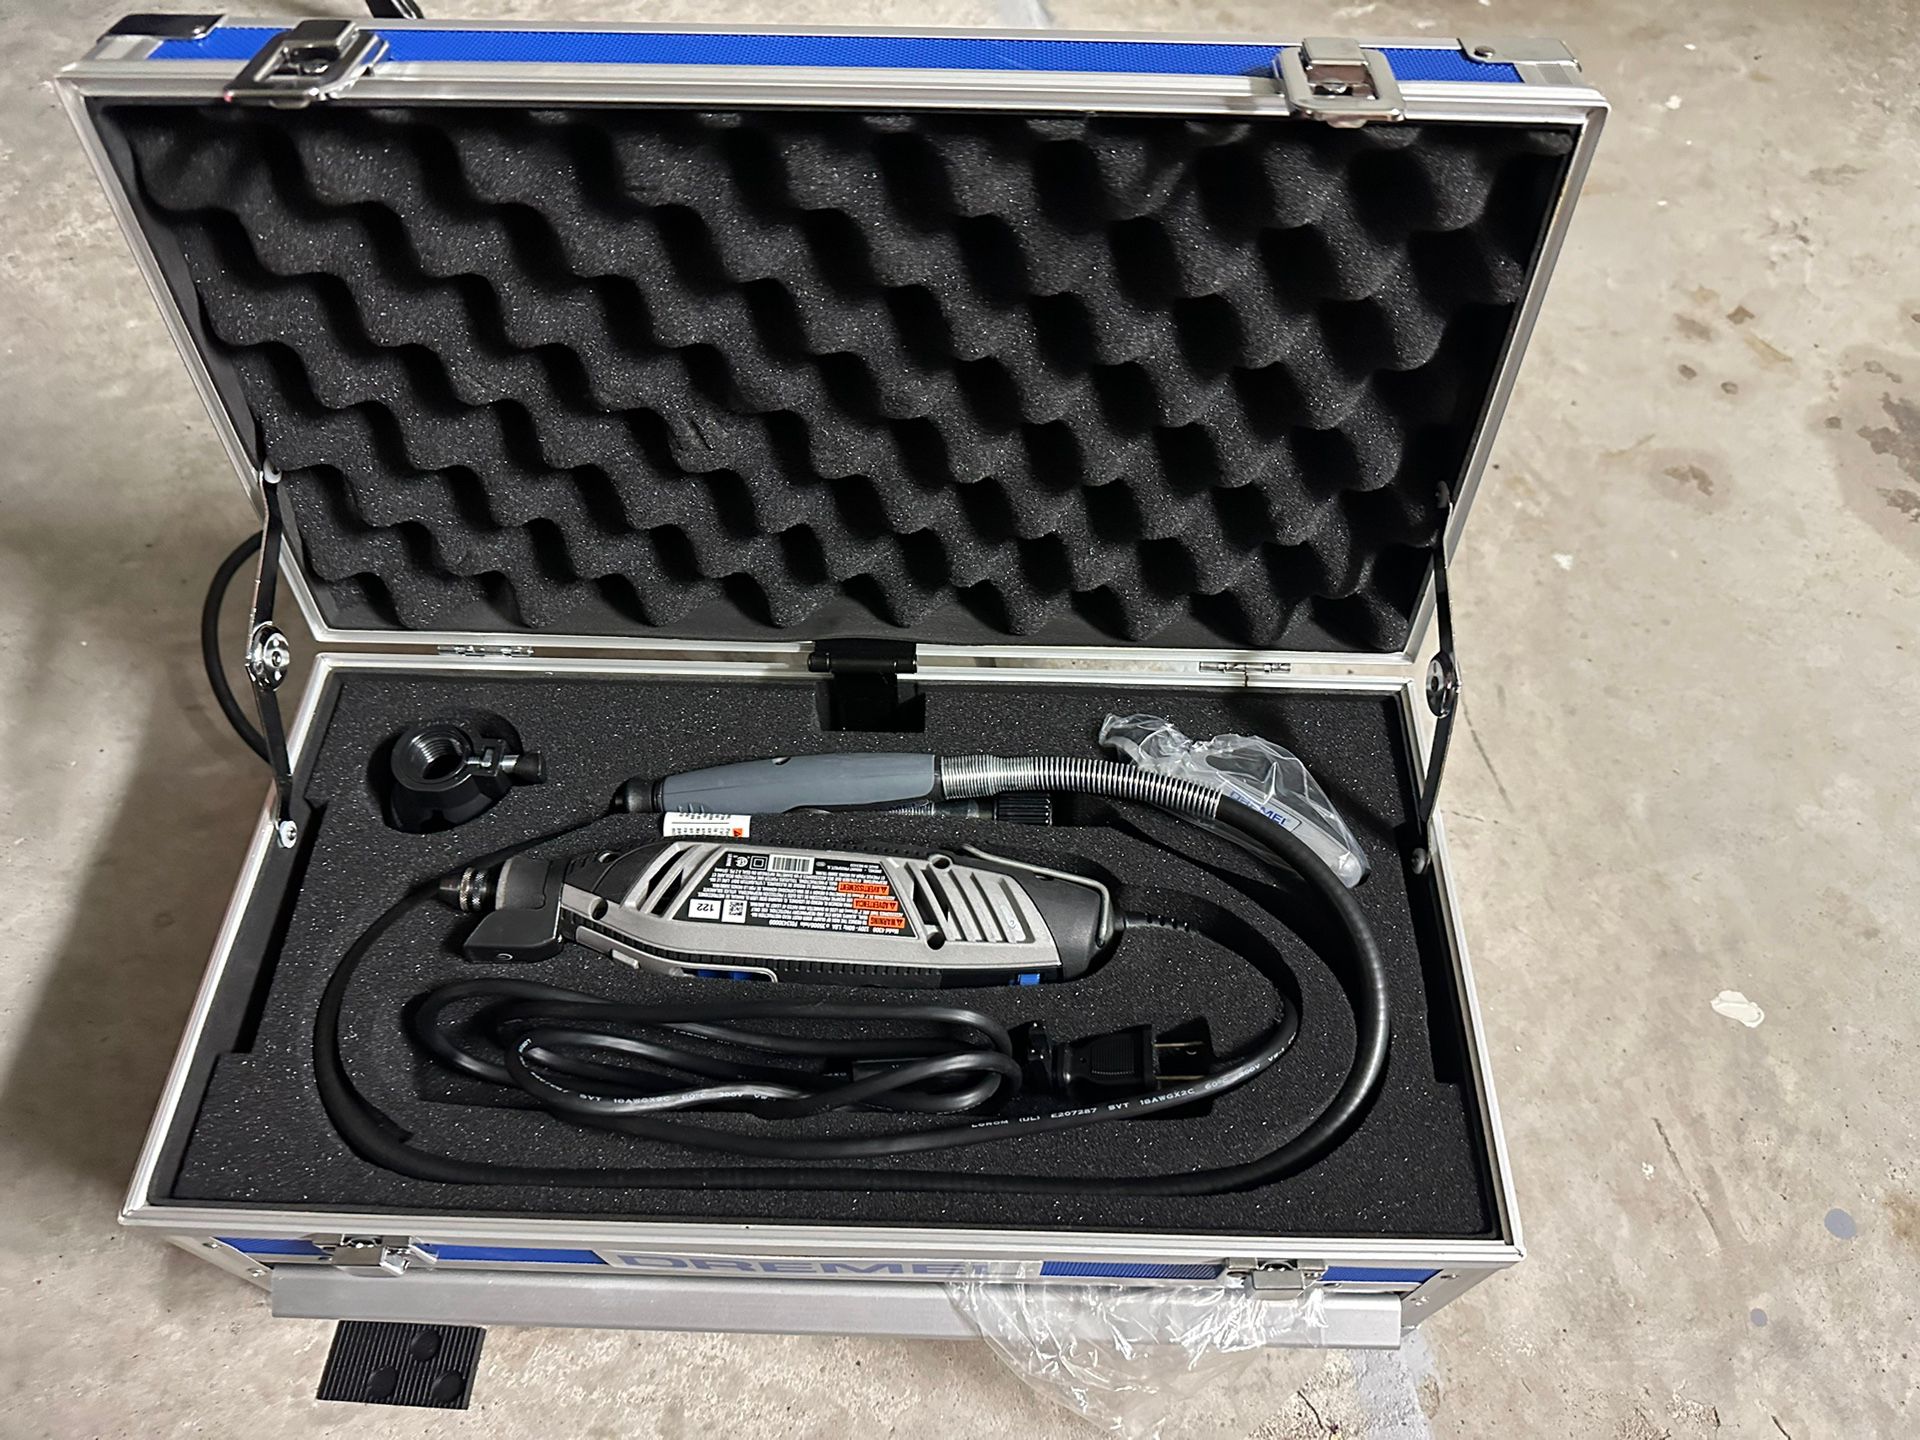 Brand New Dremel 4300 rotary Tool Kit In Box for Sale in Mckinney